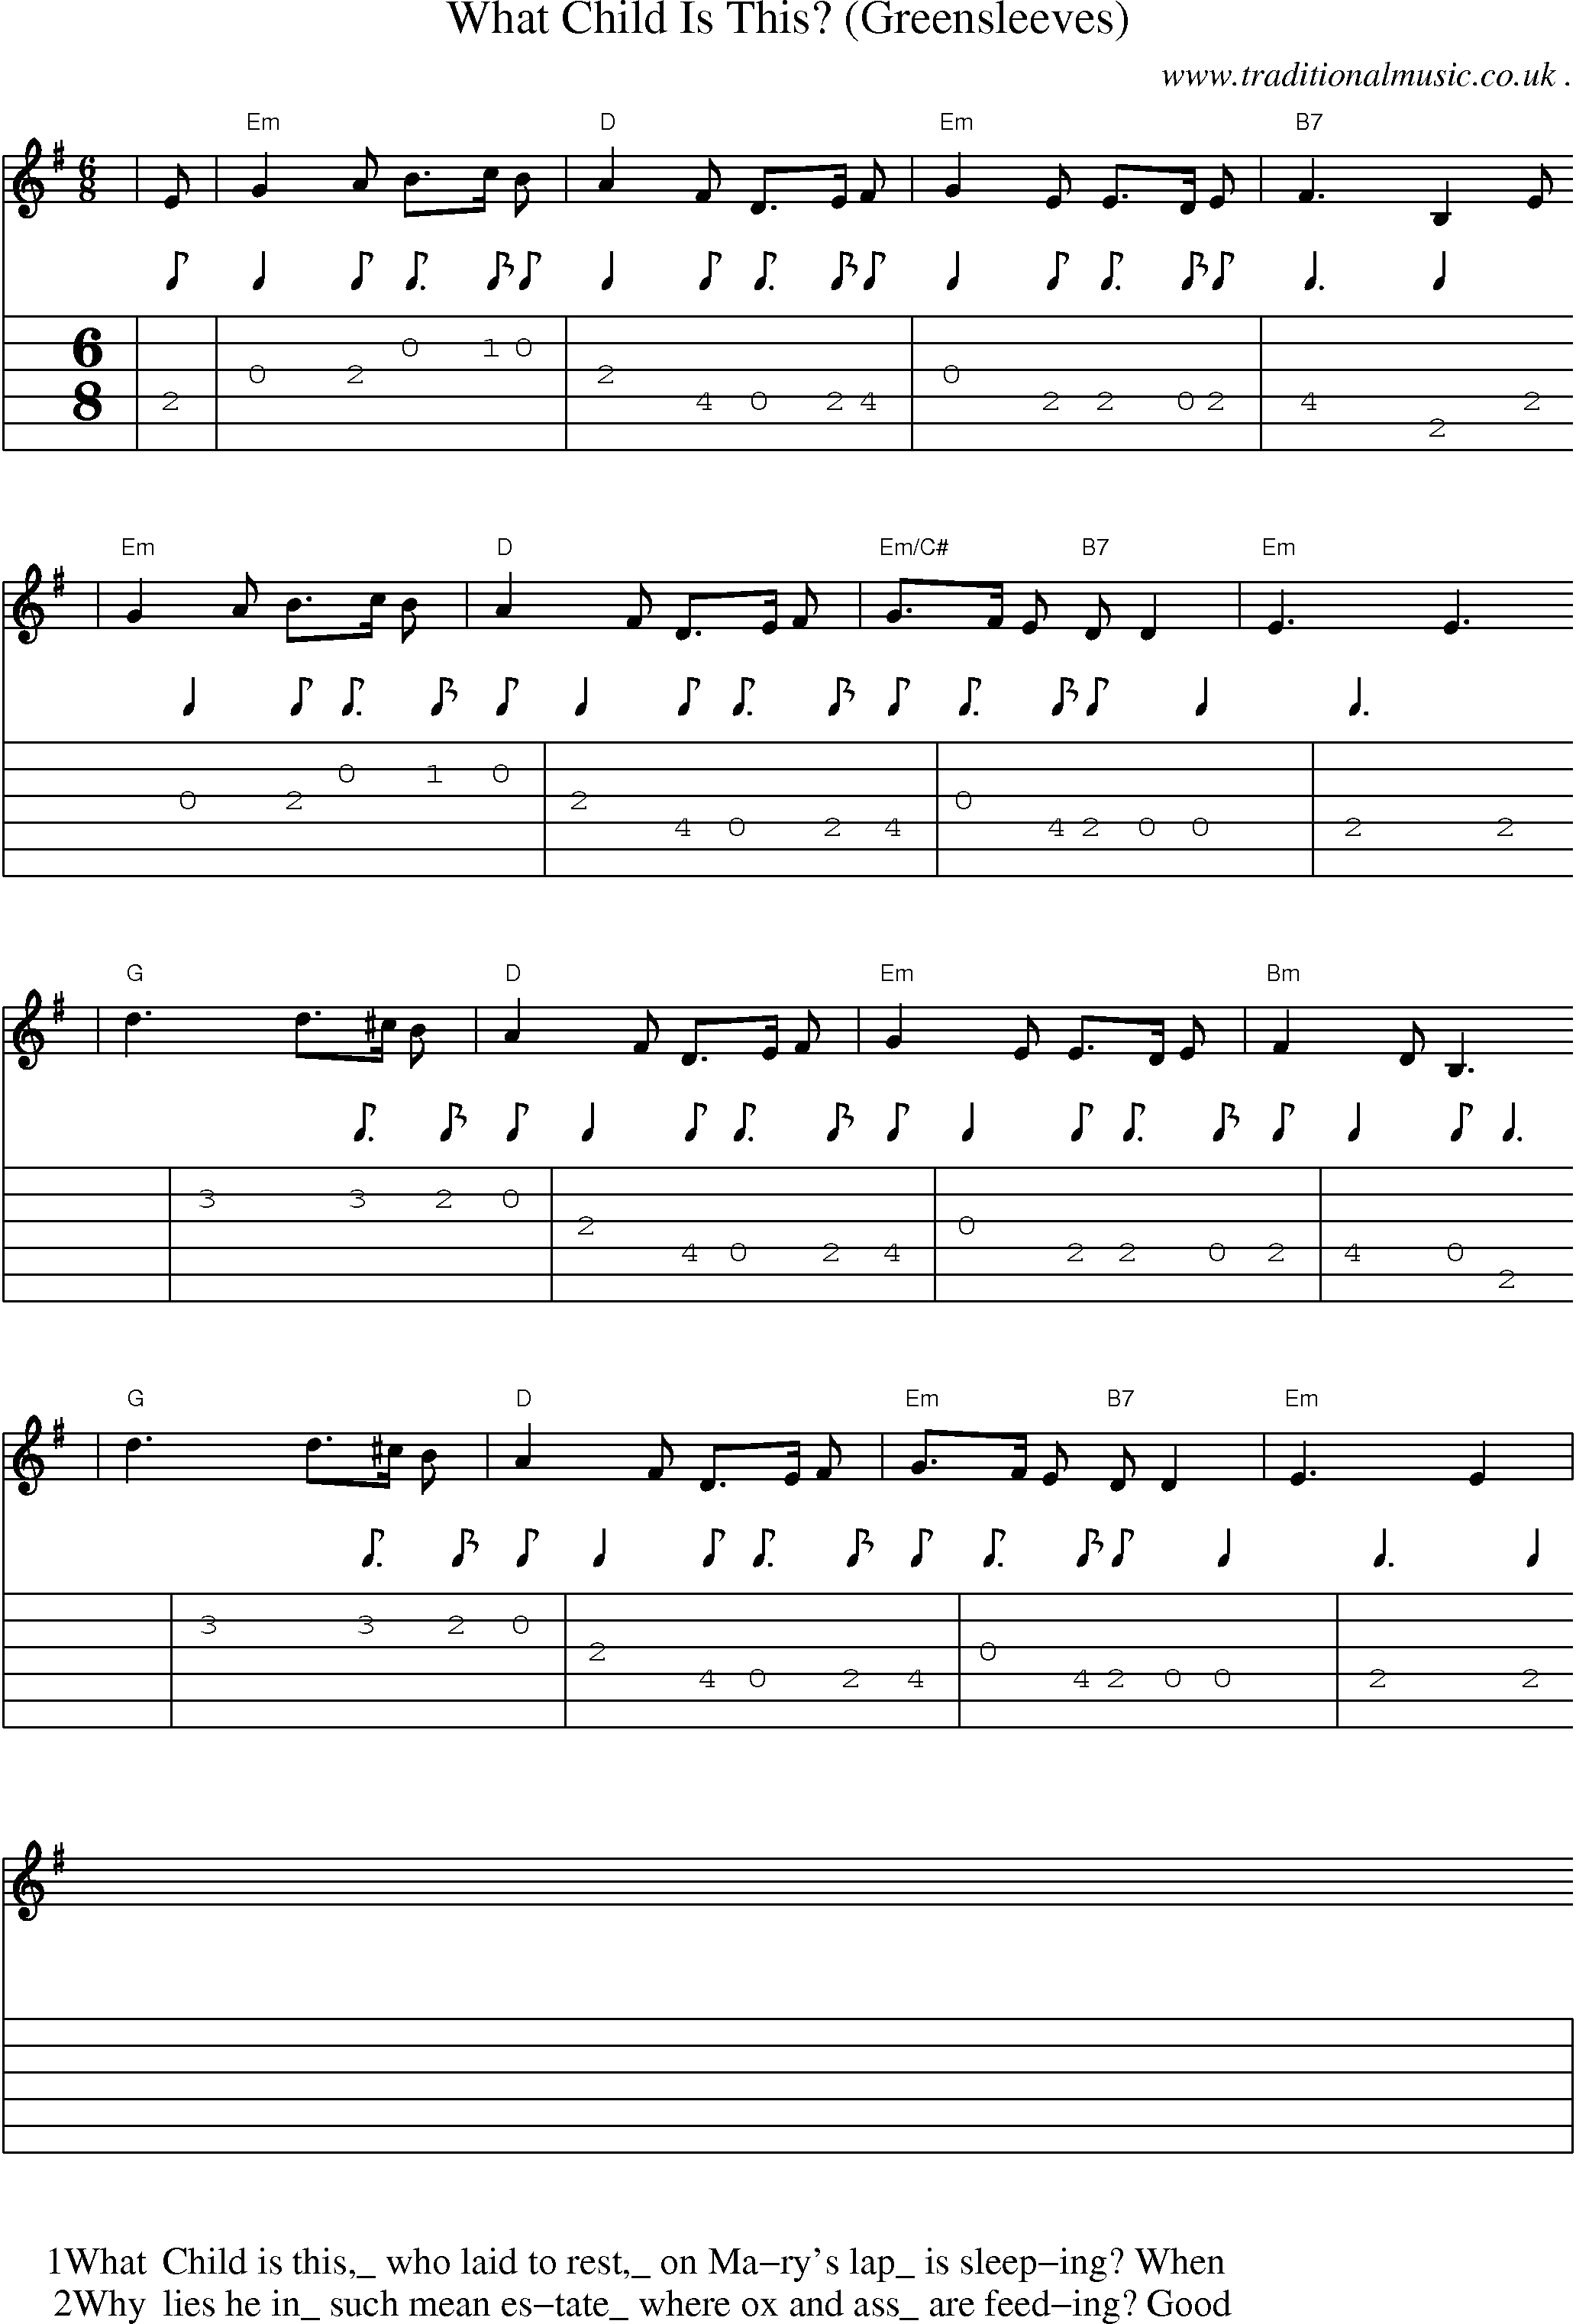 Music Score and Guitar Tabs for What Child Is This (greensleeves)